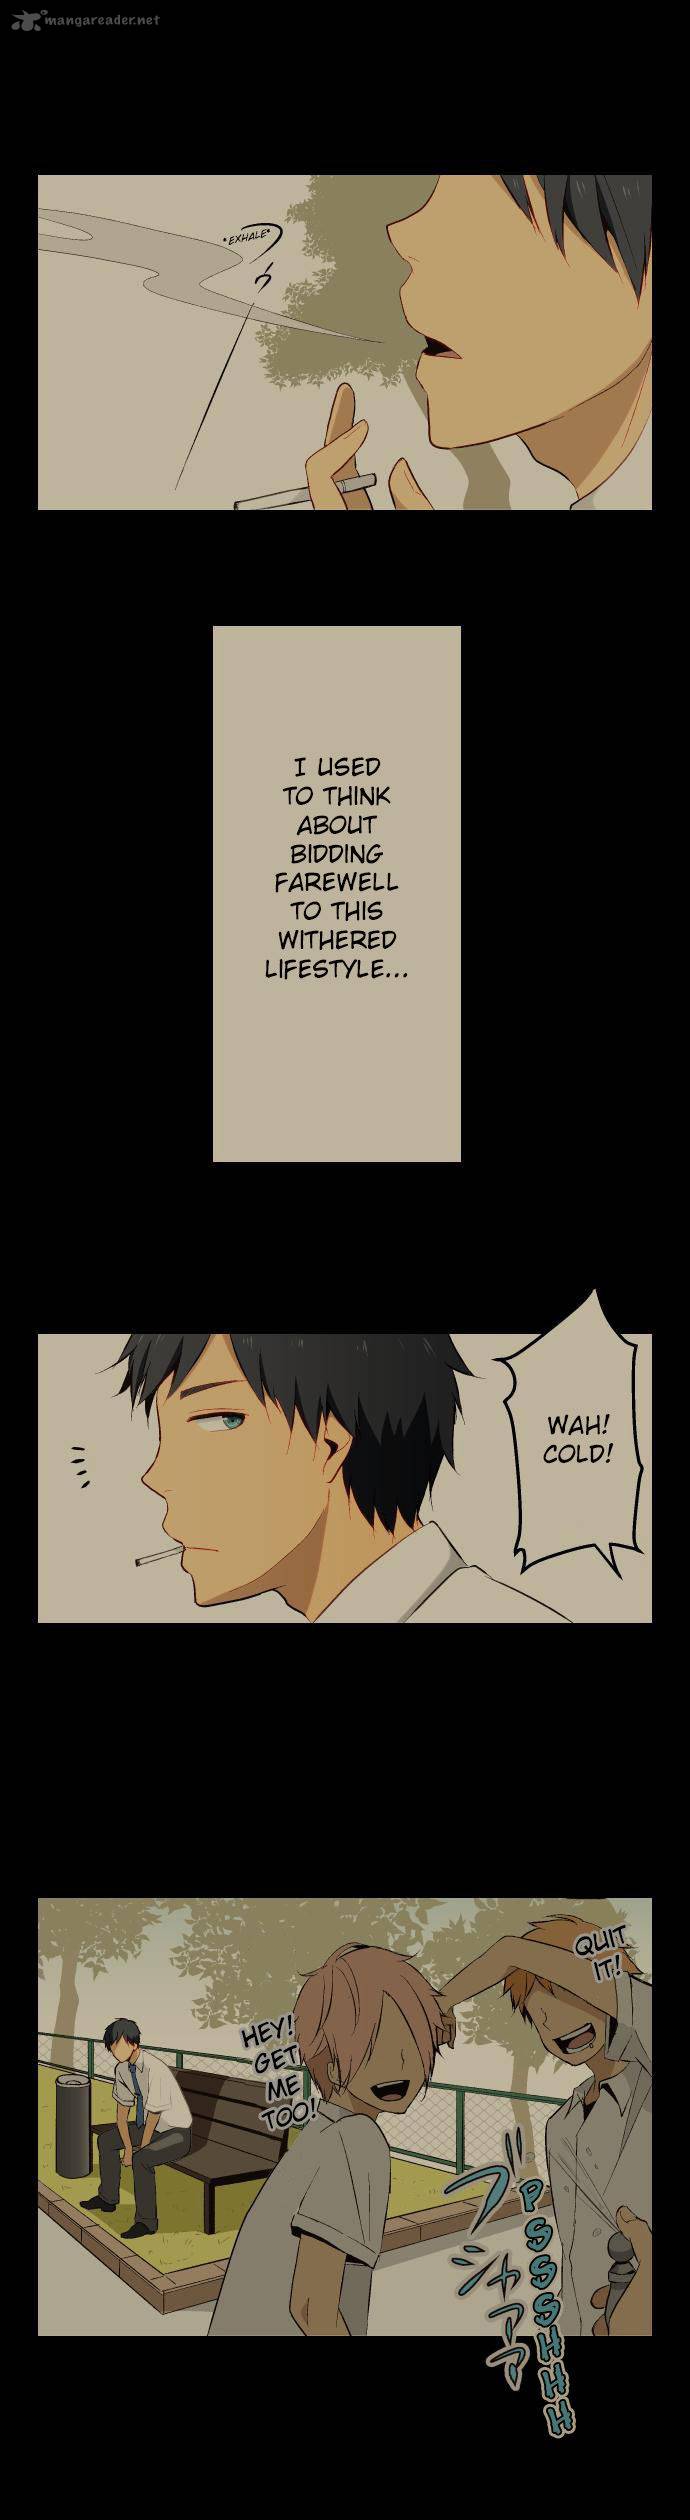 Relife 6 1